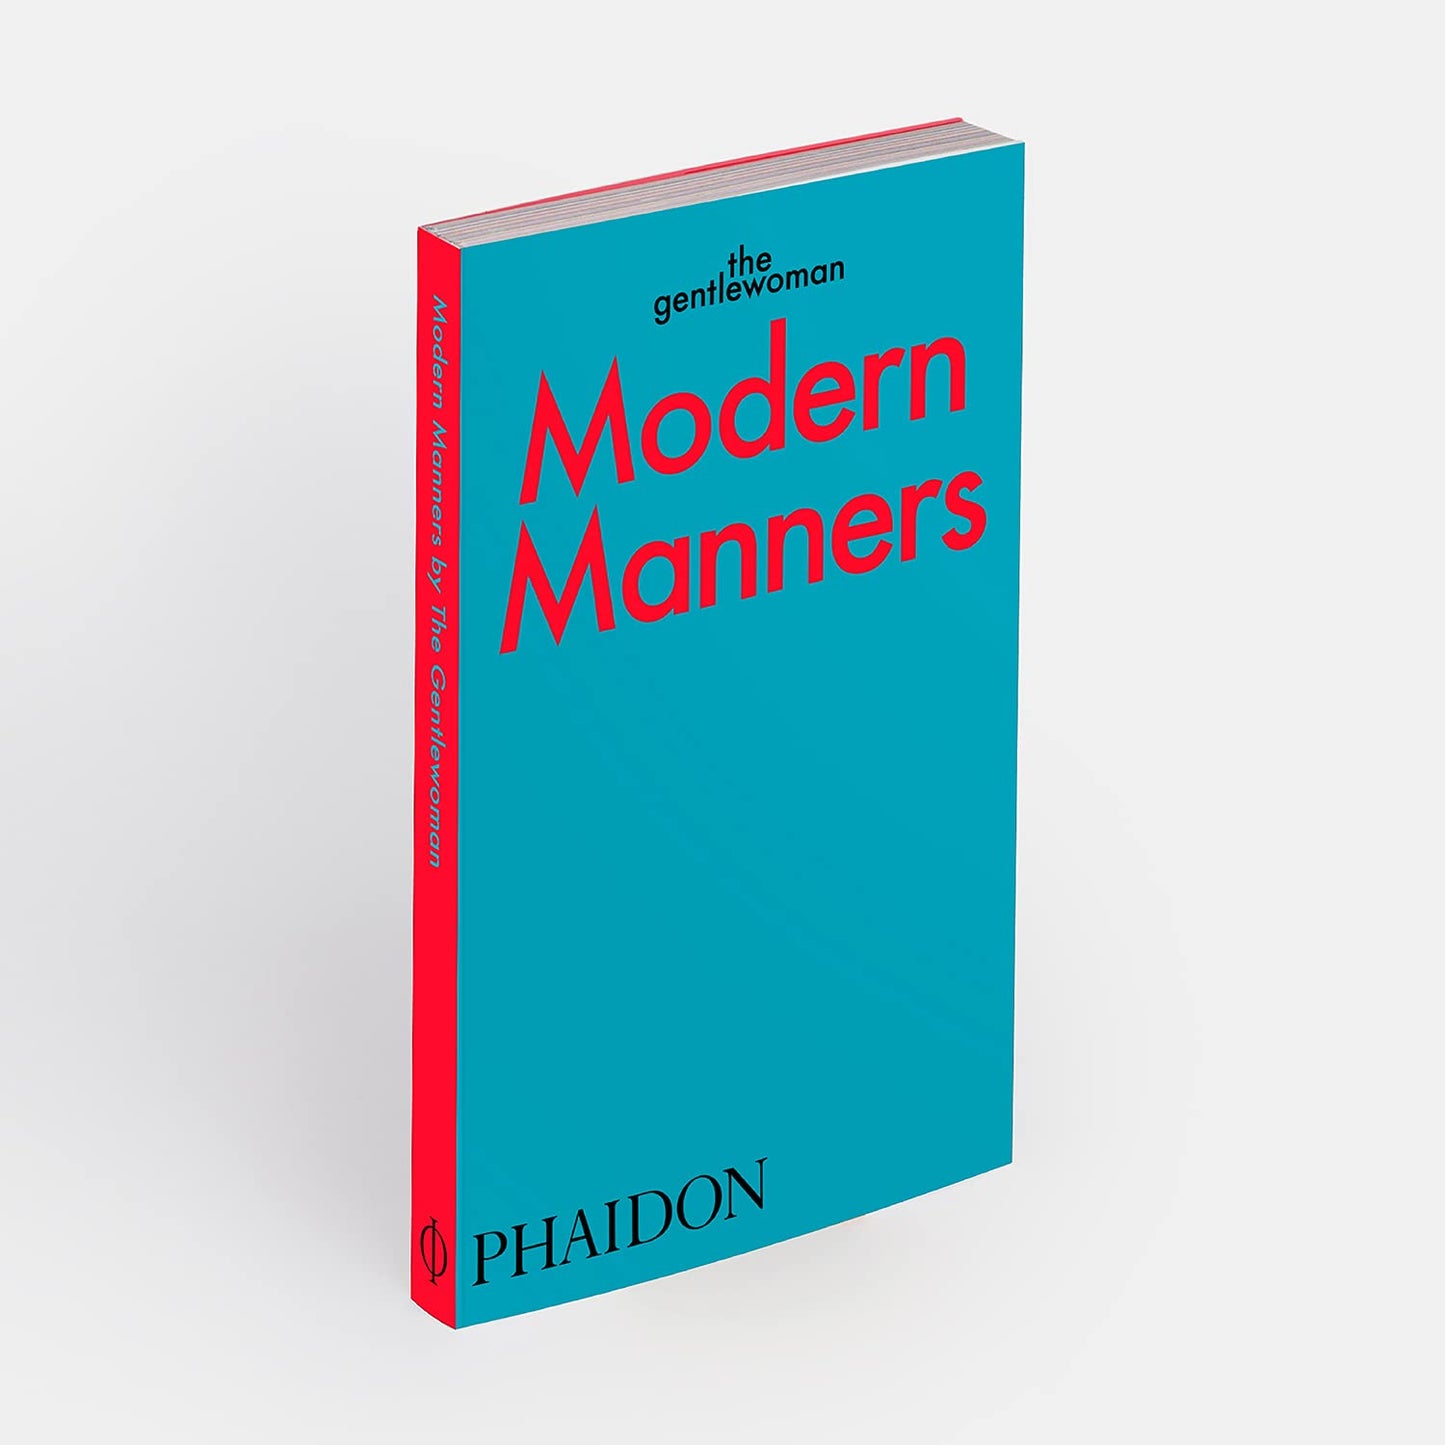 The Gentlewoman - Modern Manners: Instructions for living fabulously well